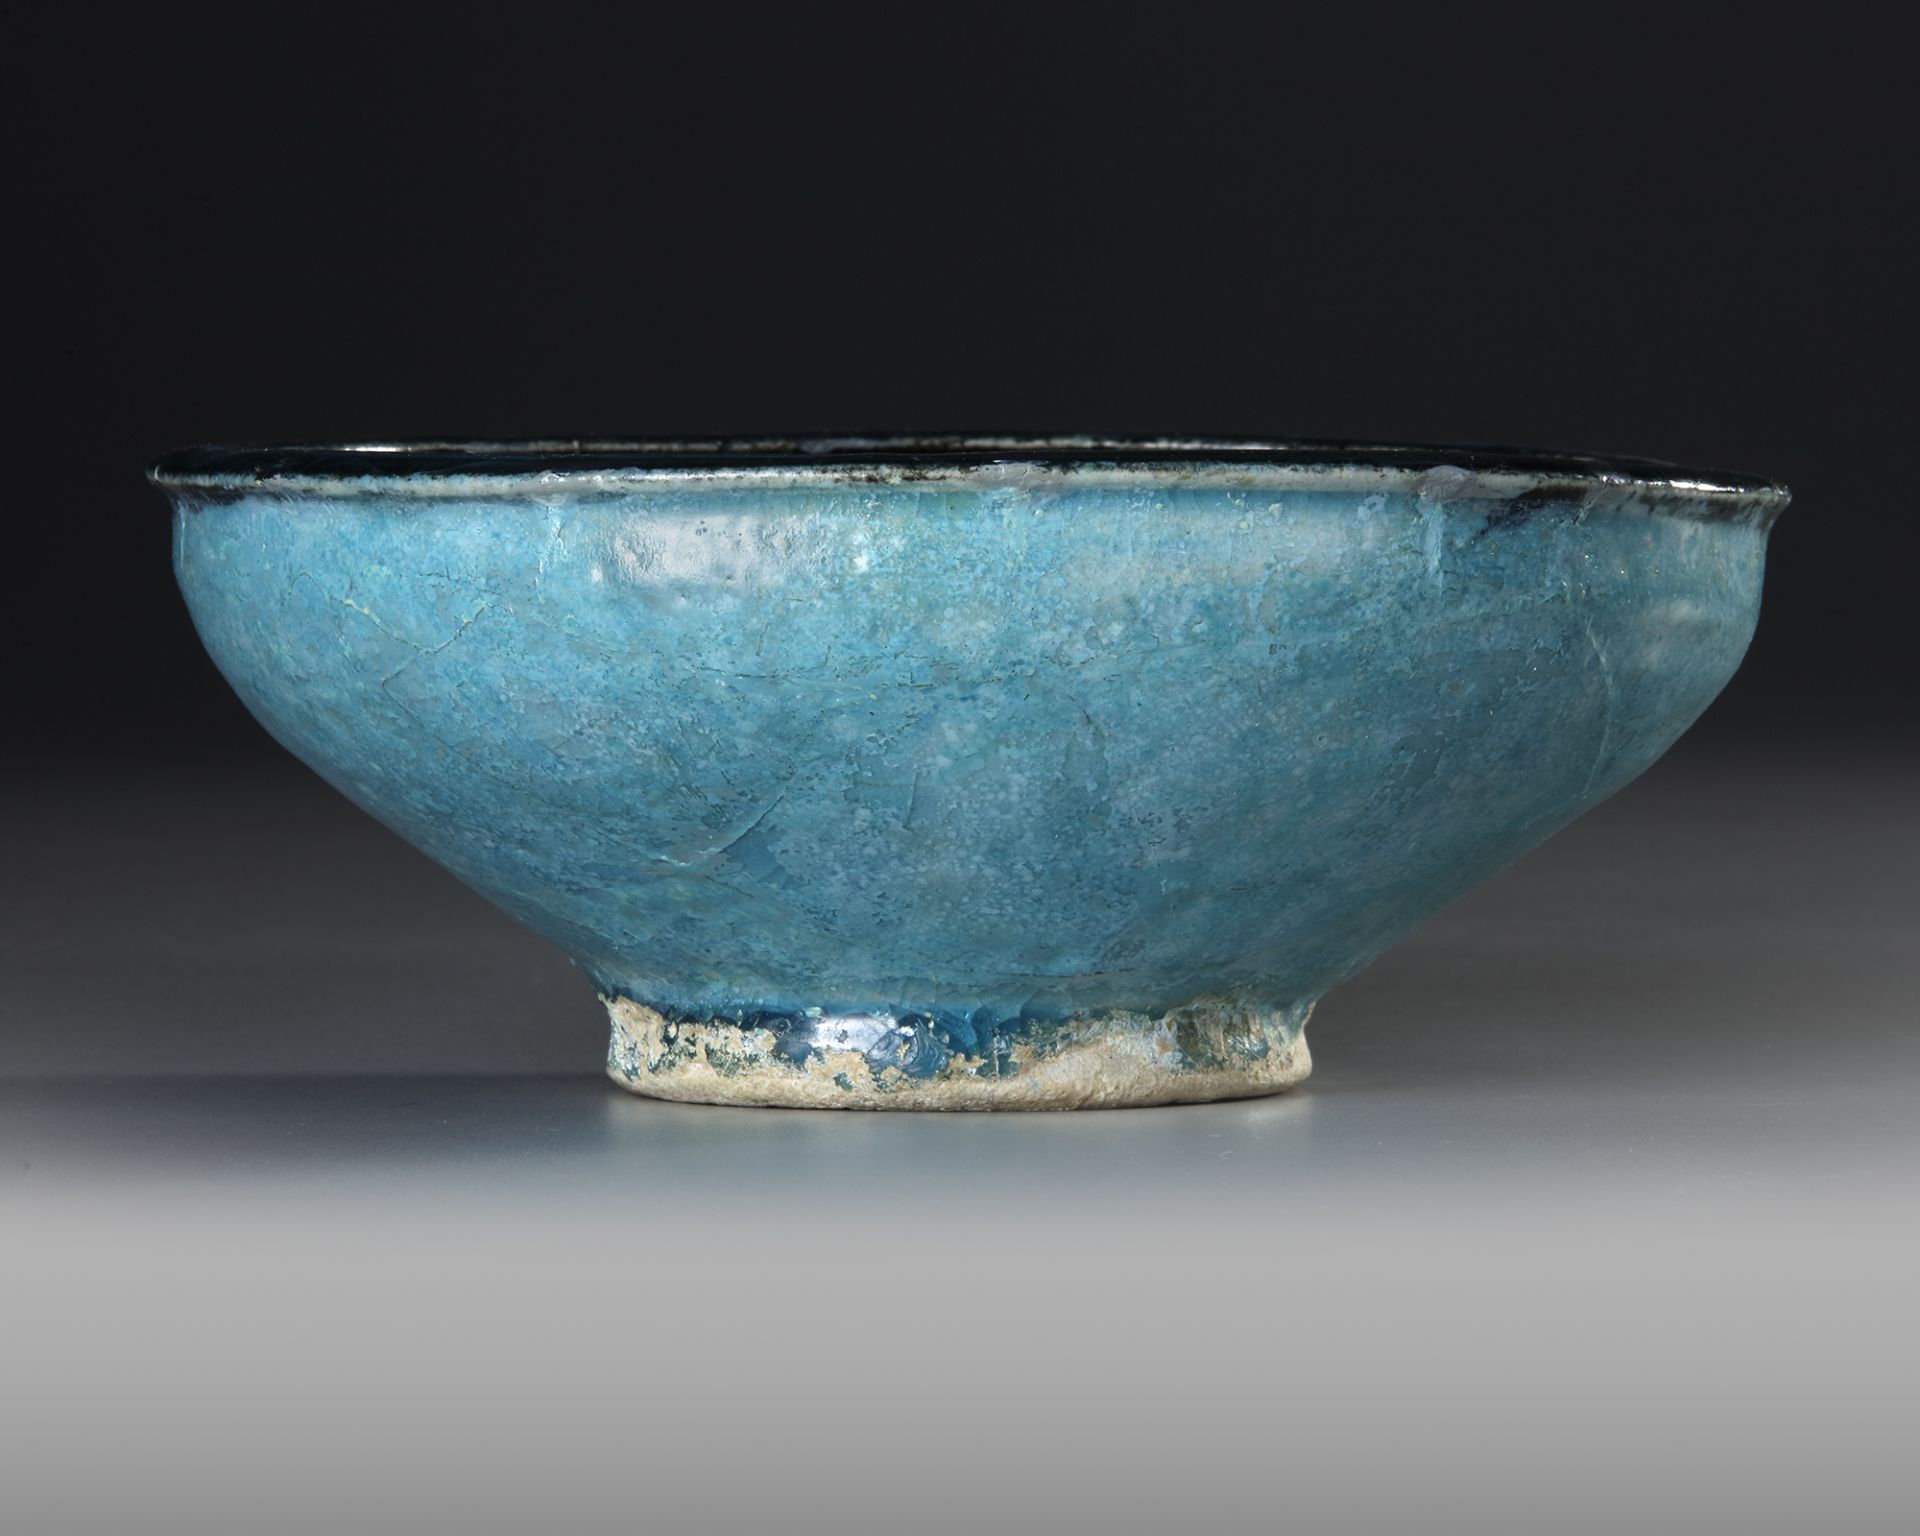 A BLACK AND TURQUOISE GLAZED KASHAN BOWL, PERSIA, 13TH CENTURY - Image 3 of 8